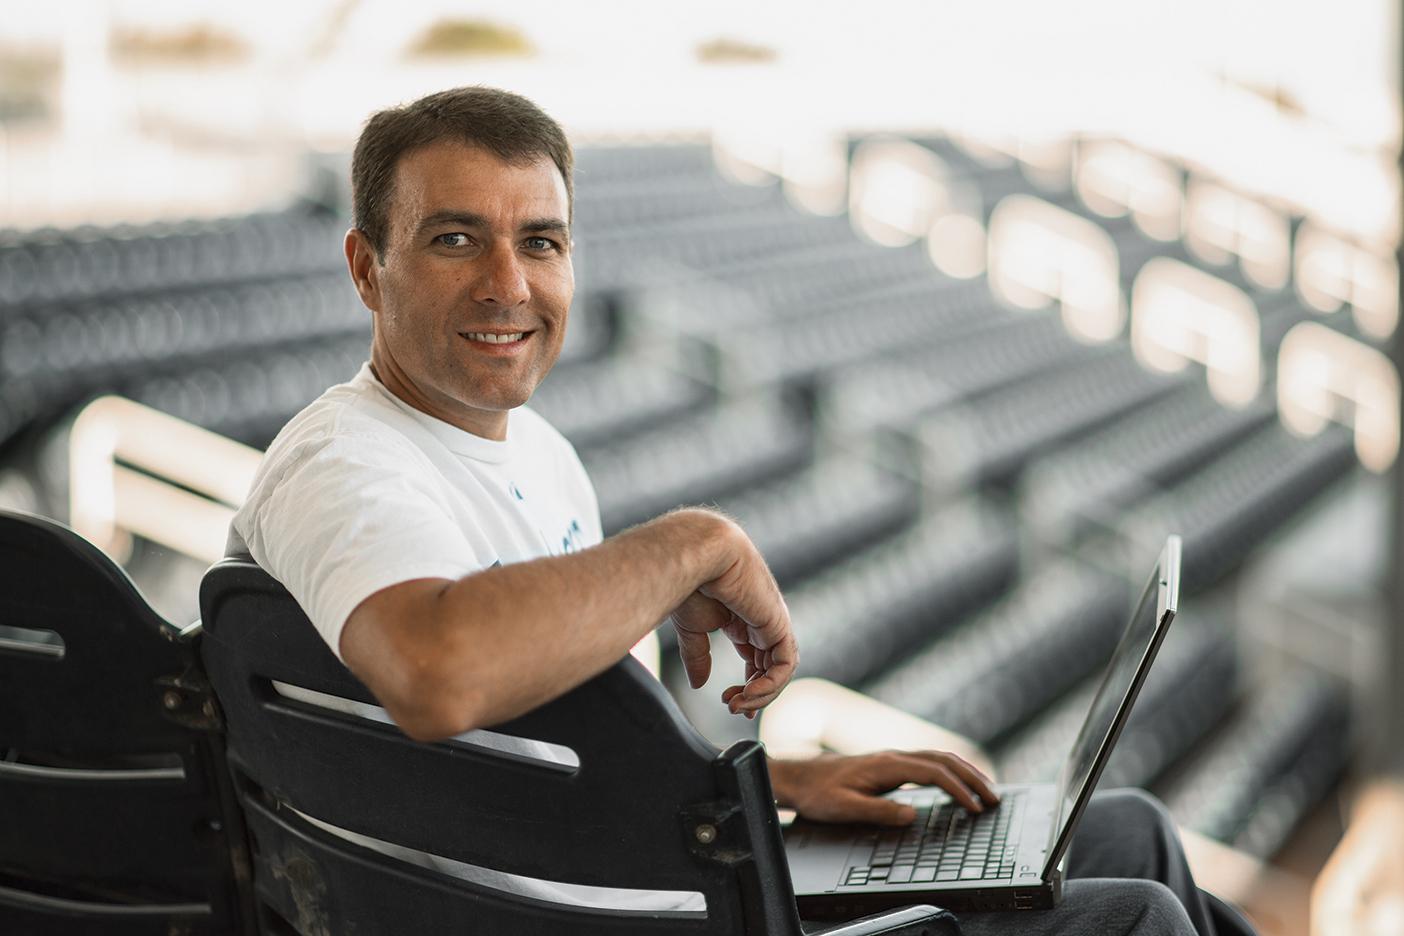 Larry Nelson in a stadium with a laptop